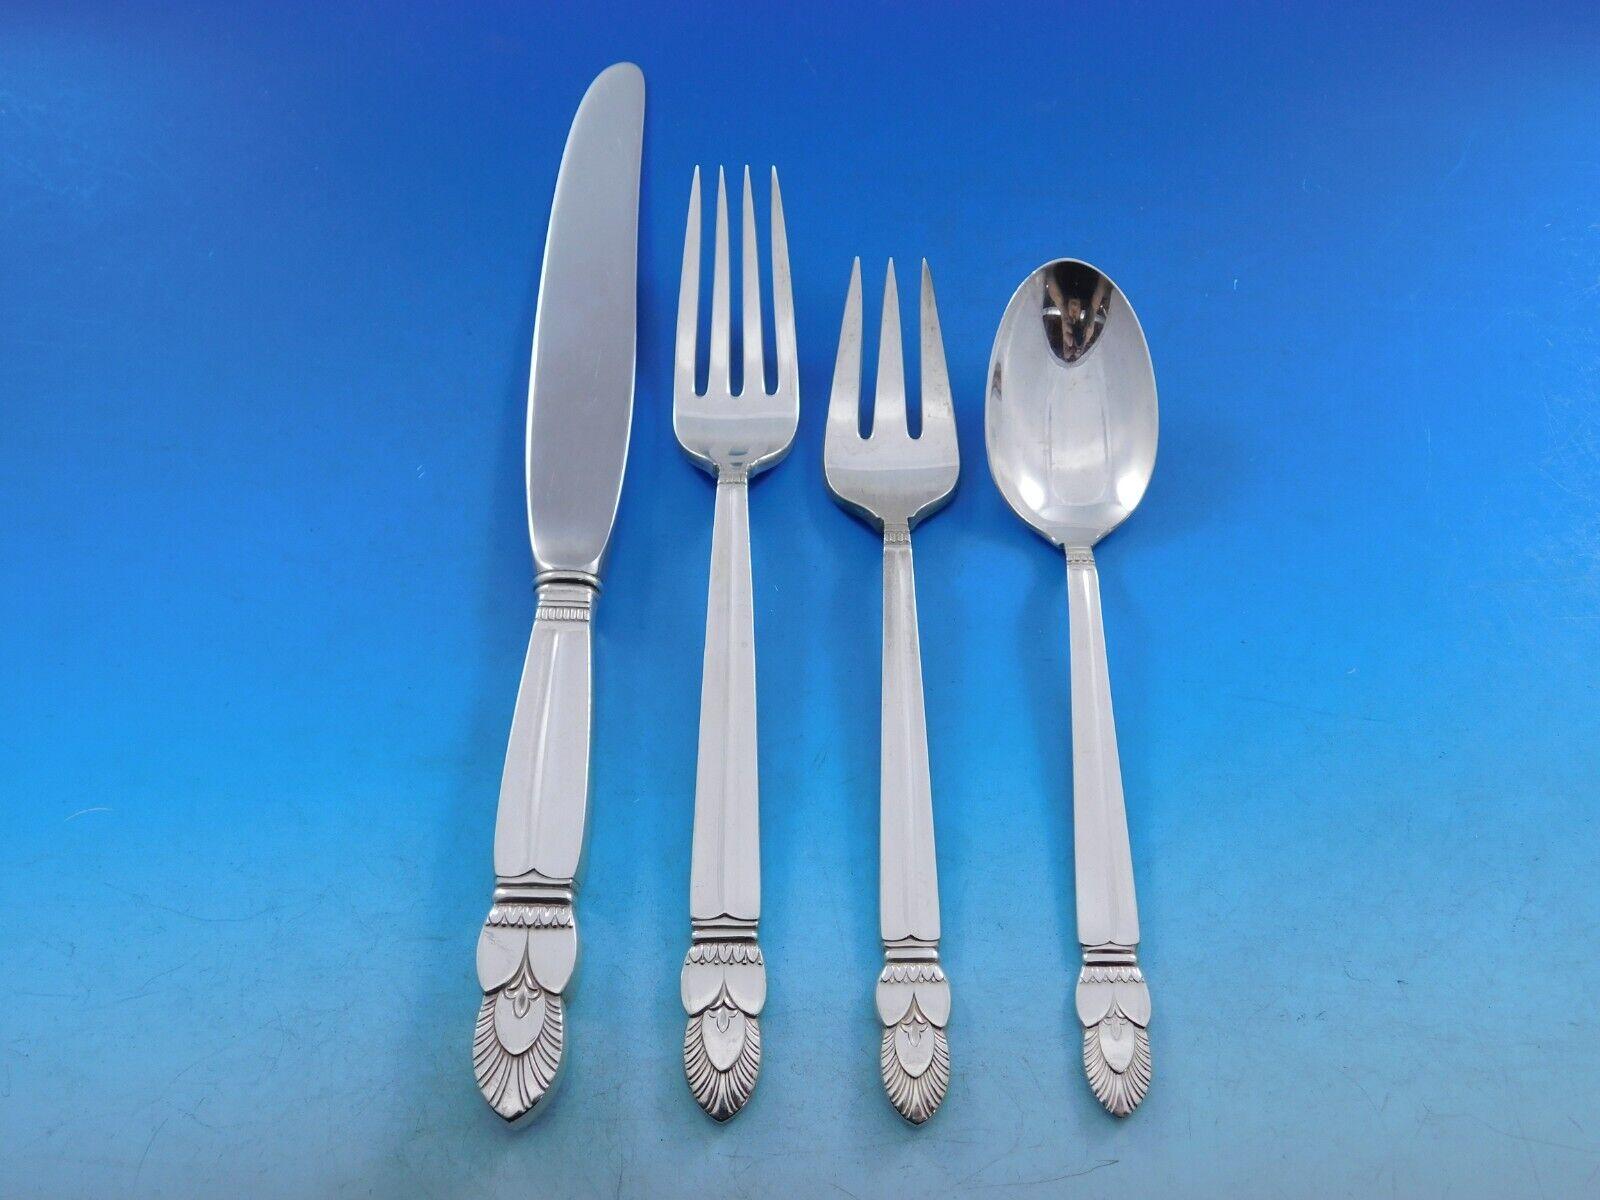 Monumental Princess Ingrid by Frank Whiting Sterling Silver Flatware set - 115 pieces. This set includes:

12 Regular Knives, 9